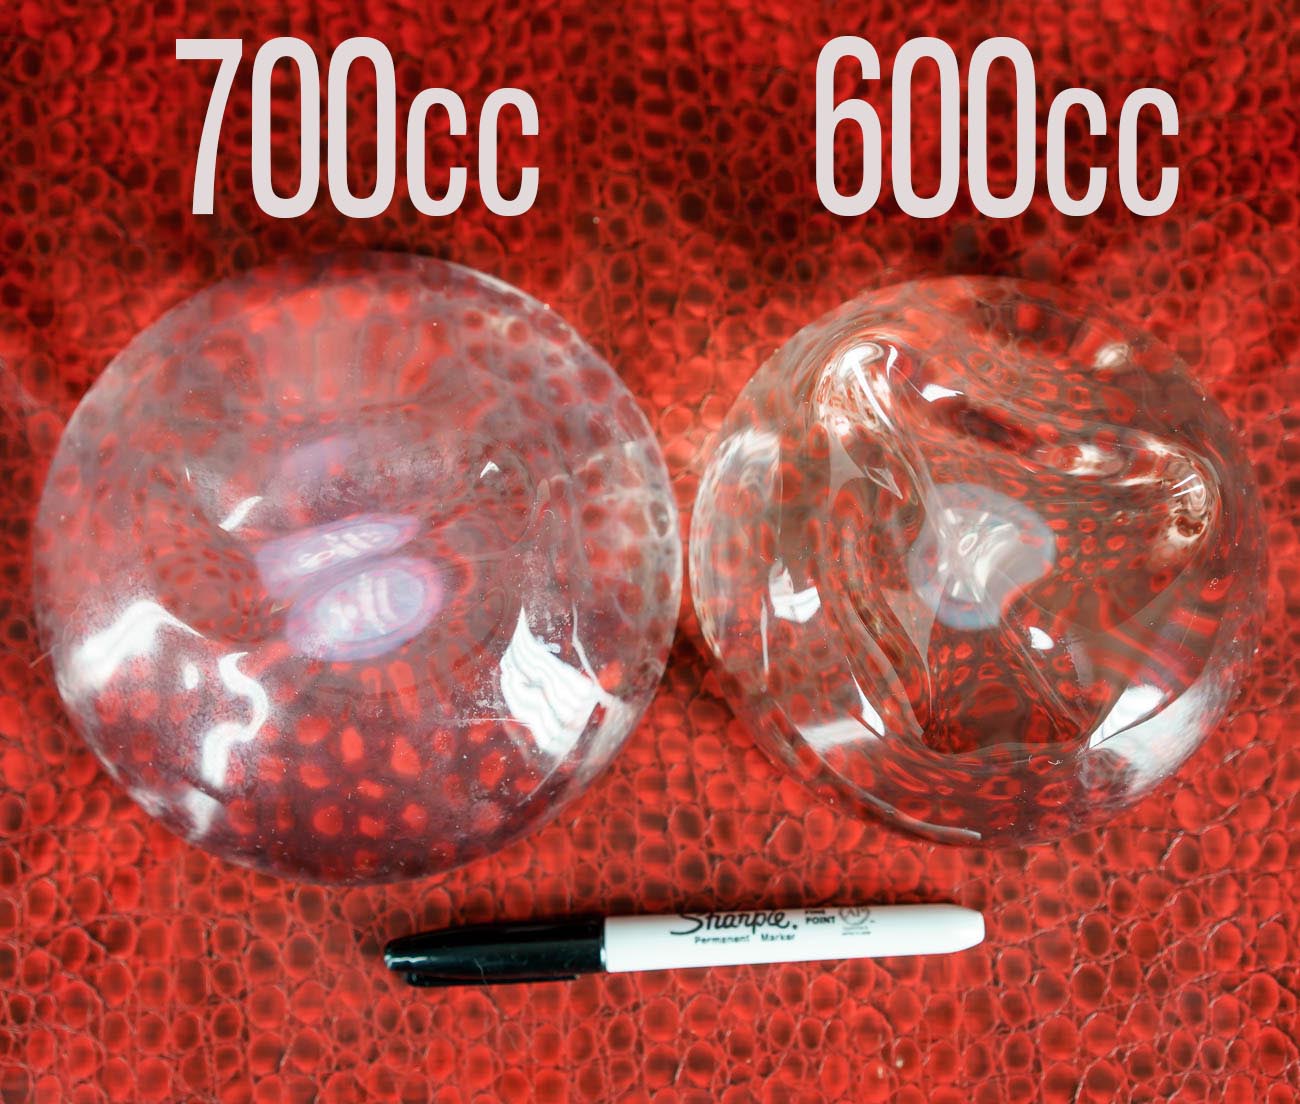 I am also selling my 700cc implants (see other item on my store). 